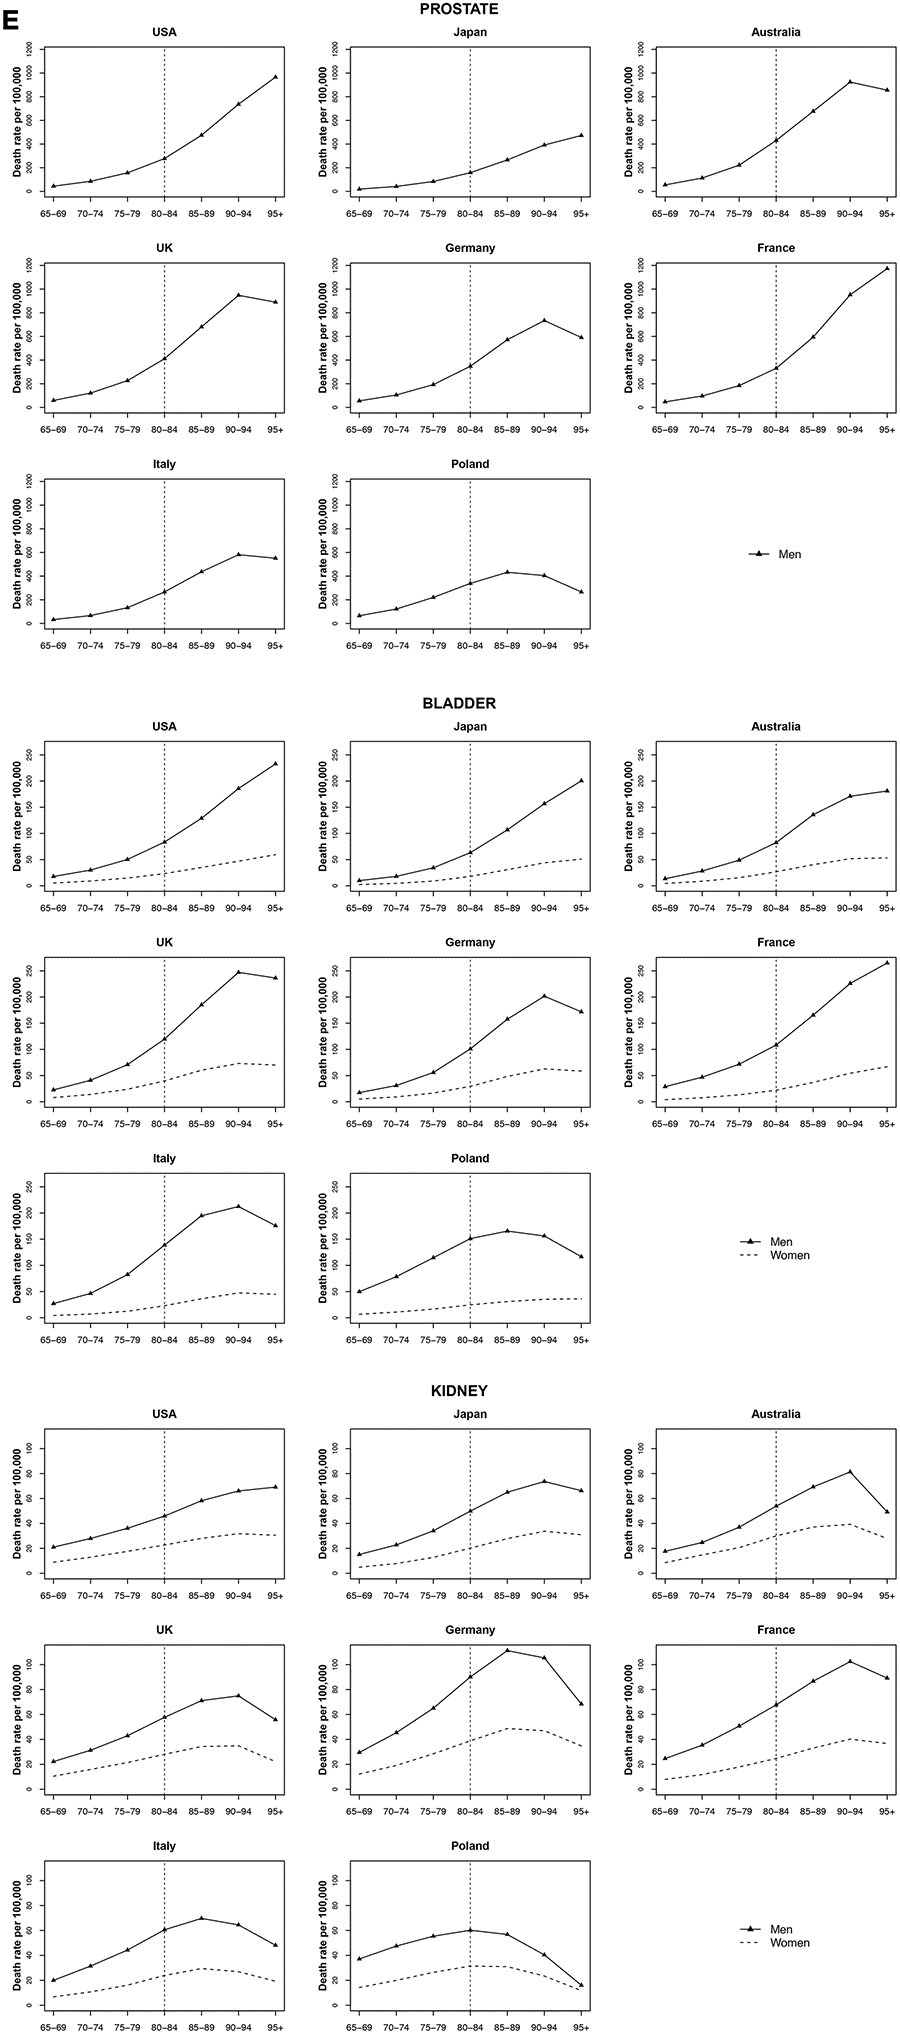 Death rate per 100 000 persons for prostate, bladder and kidney cancers in men and women at age groups 65-69, 70-74, 75-79, 80-84, 85-89, 90-94, 95+ years, in selected worldwide countries.